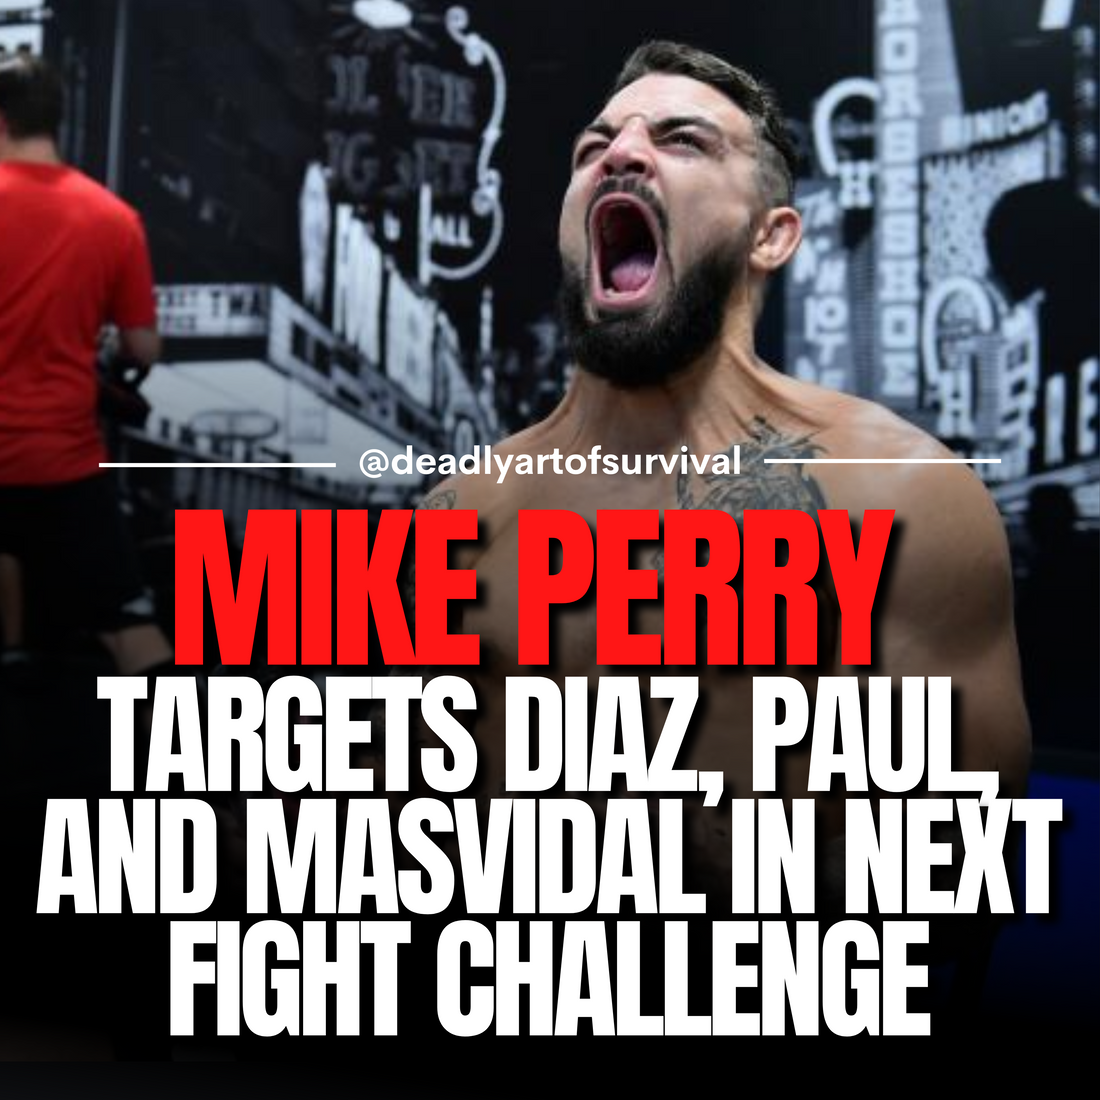 Mike Perry Eyes Big Names for Next Bout, Calls Out Nate Diaz, Jake Paul, and Jorge Masvidal